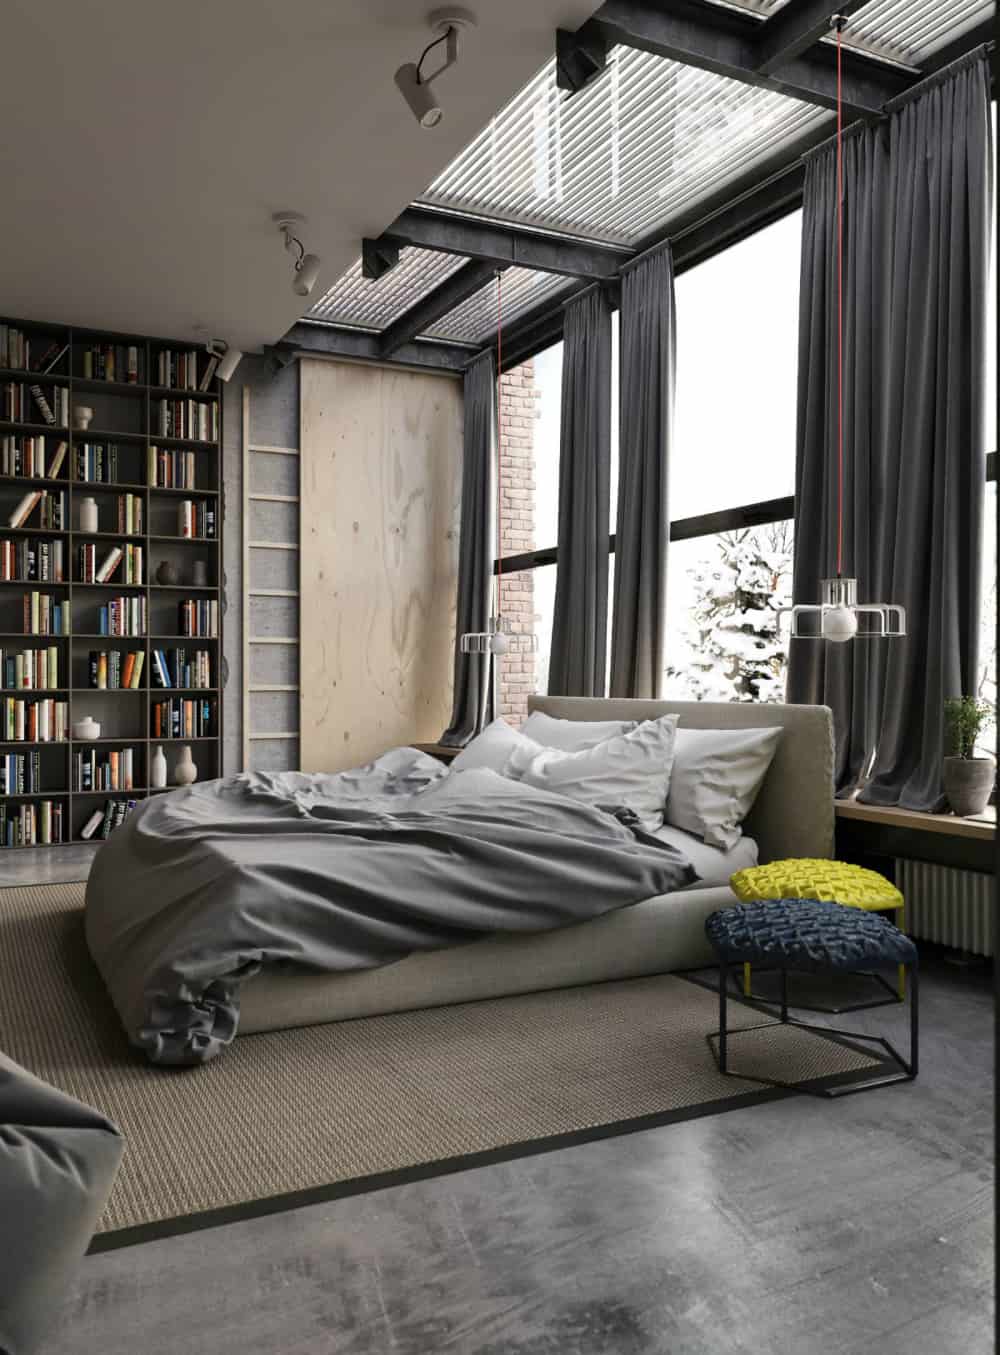 Bedroom library